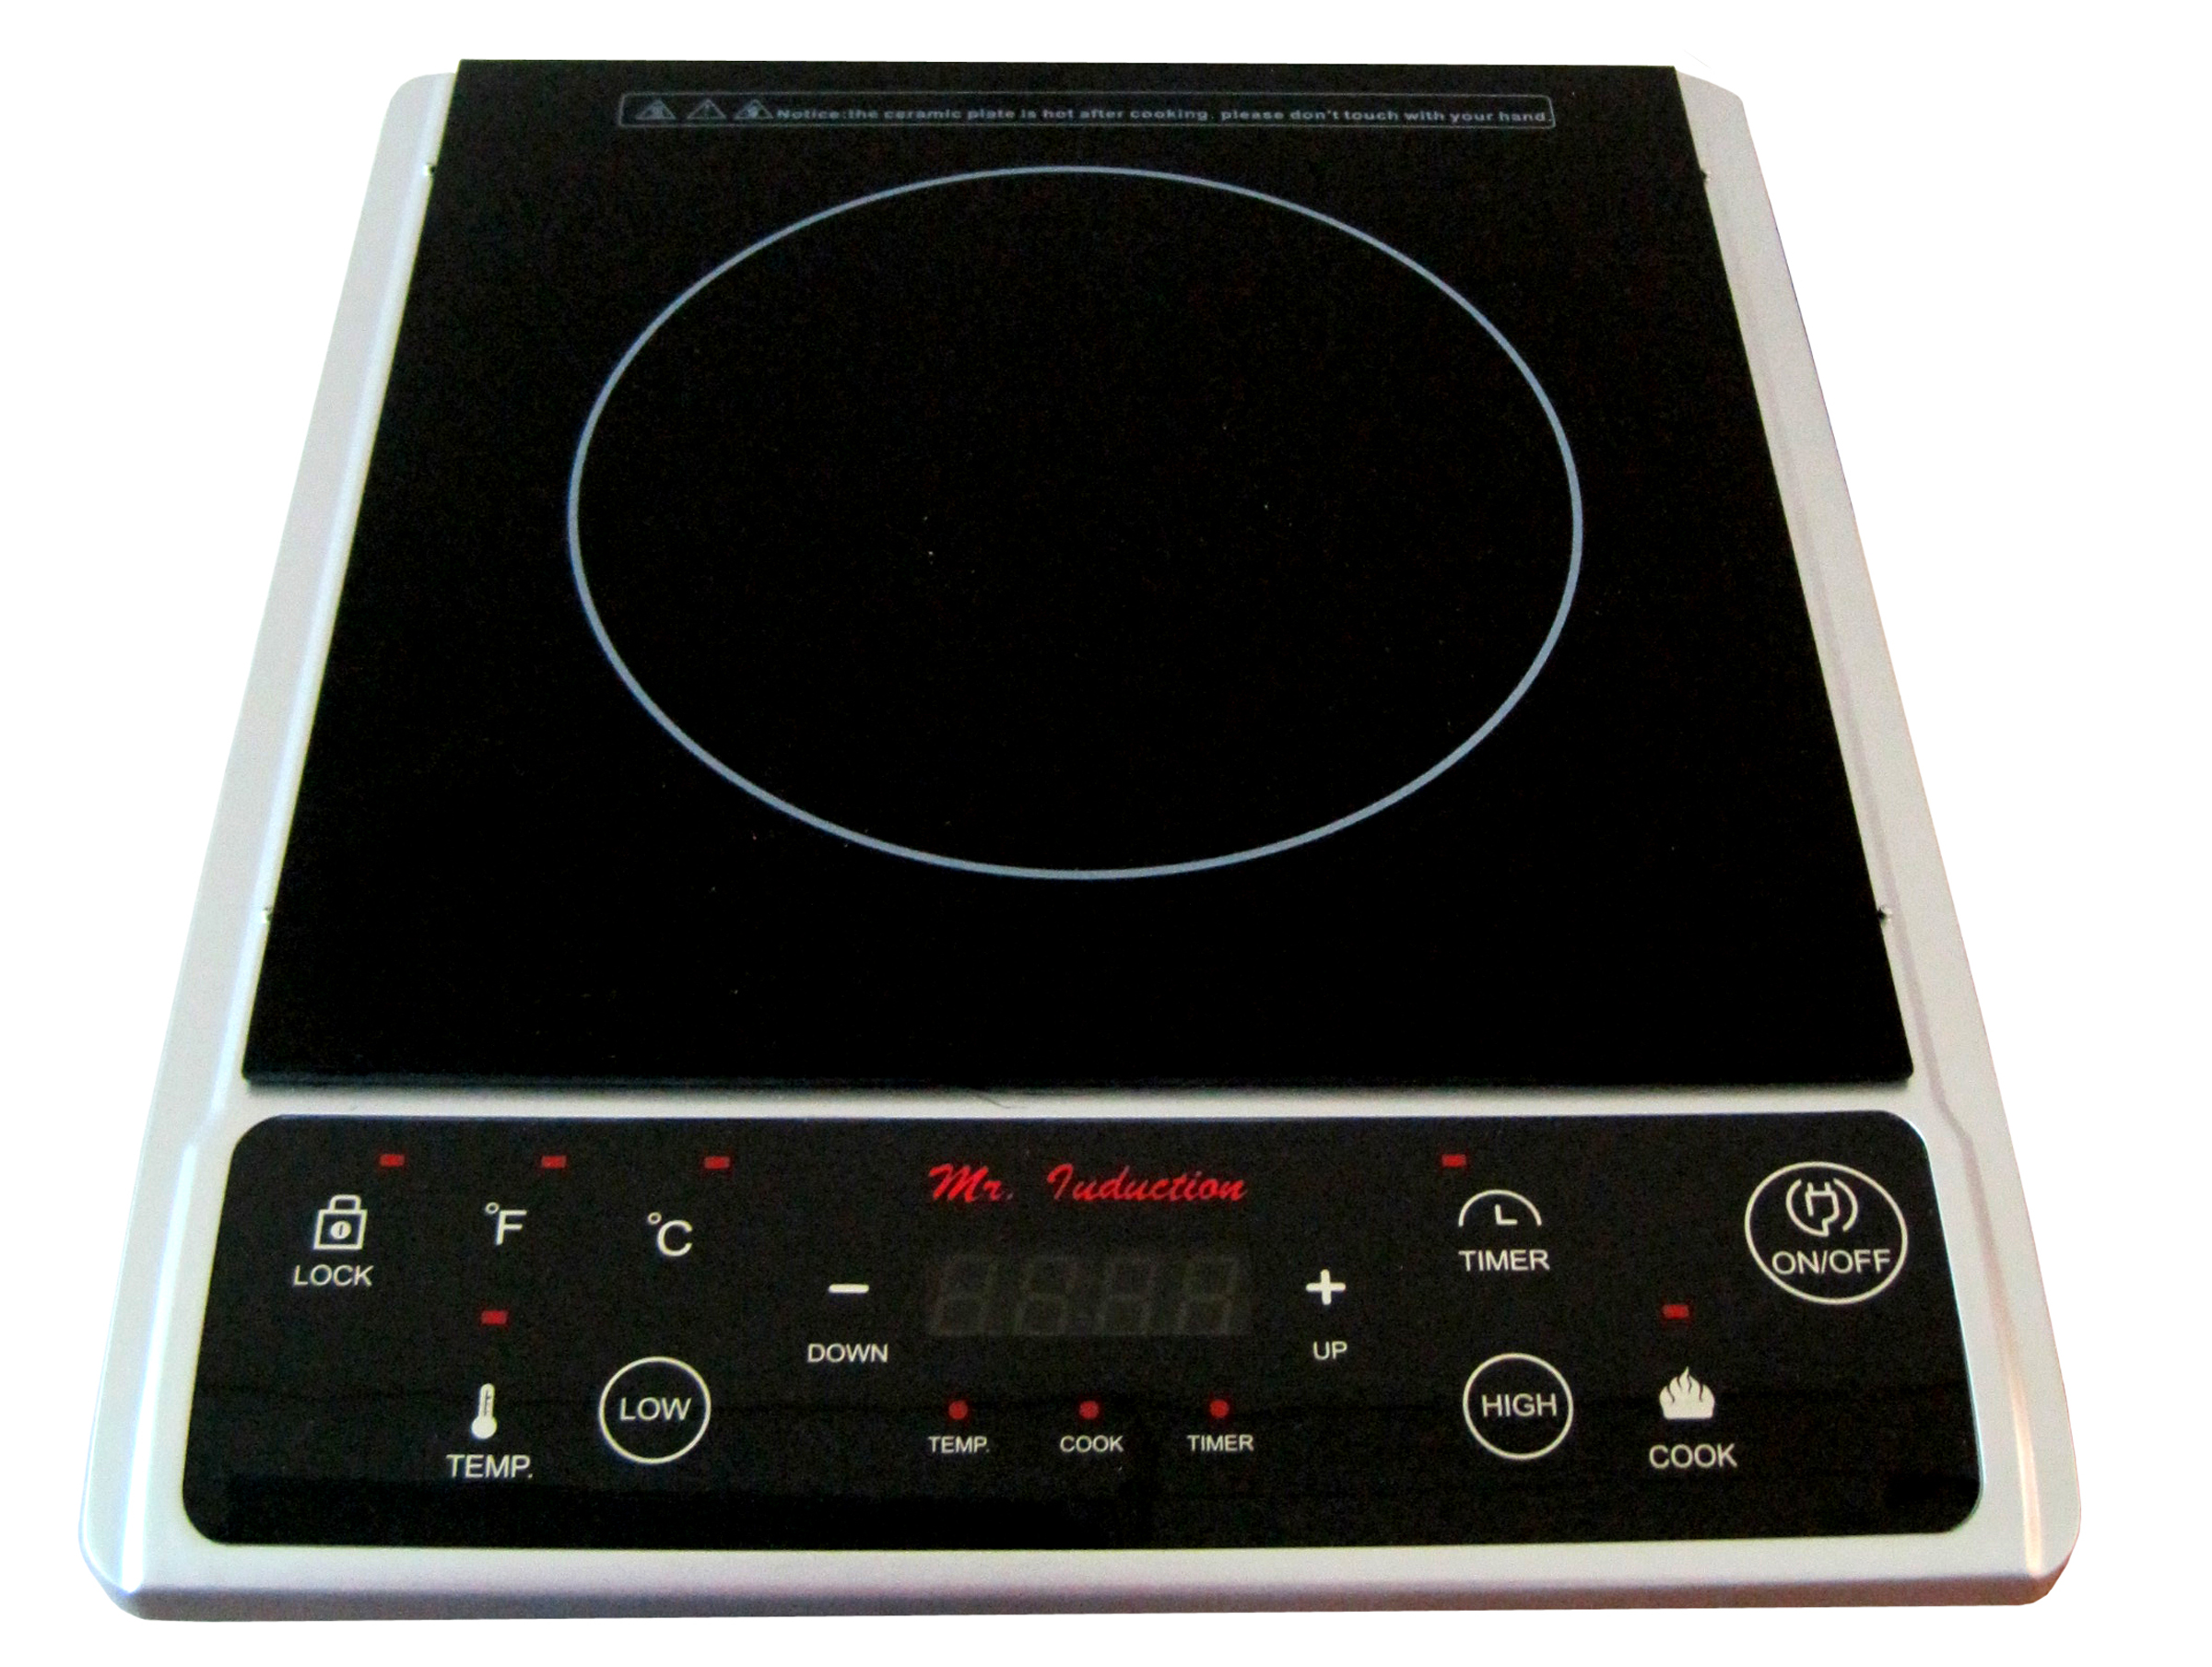 SPT 1,300W Induction Cooktop, Silver - image 4 of 4